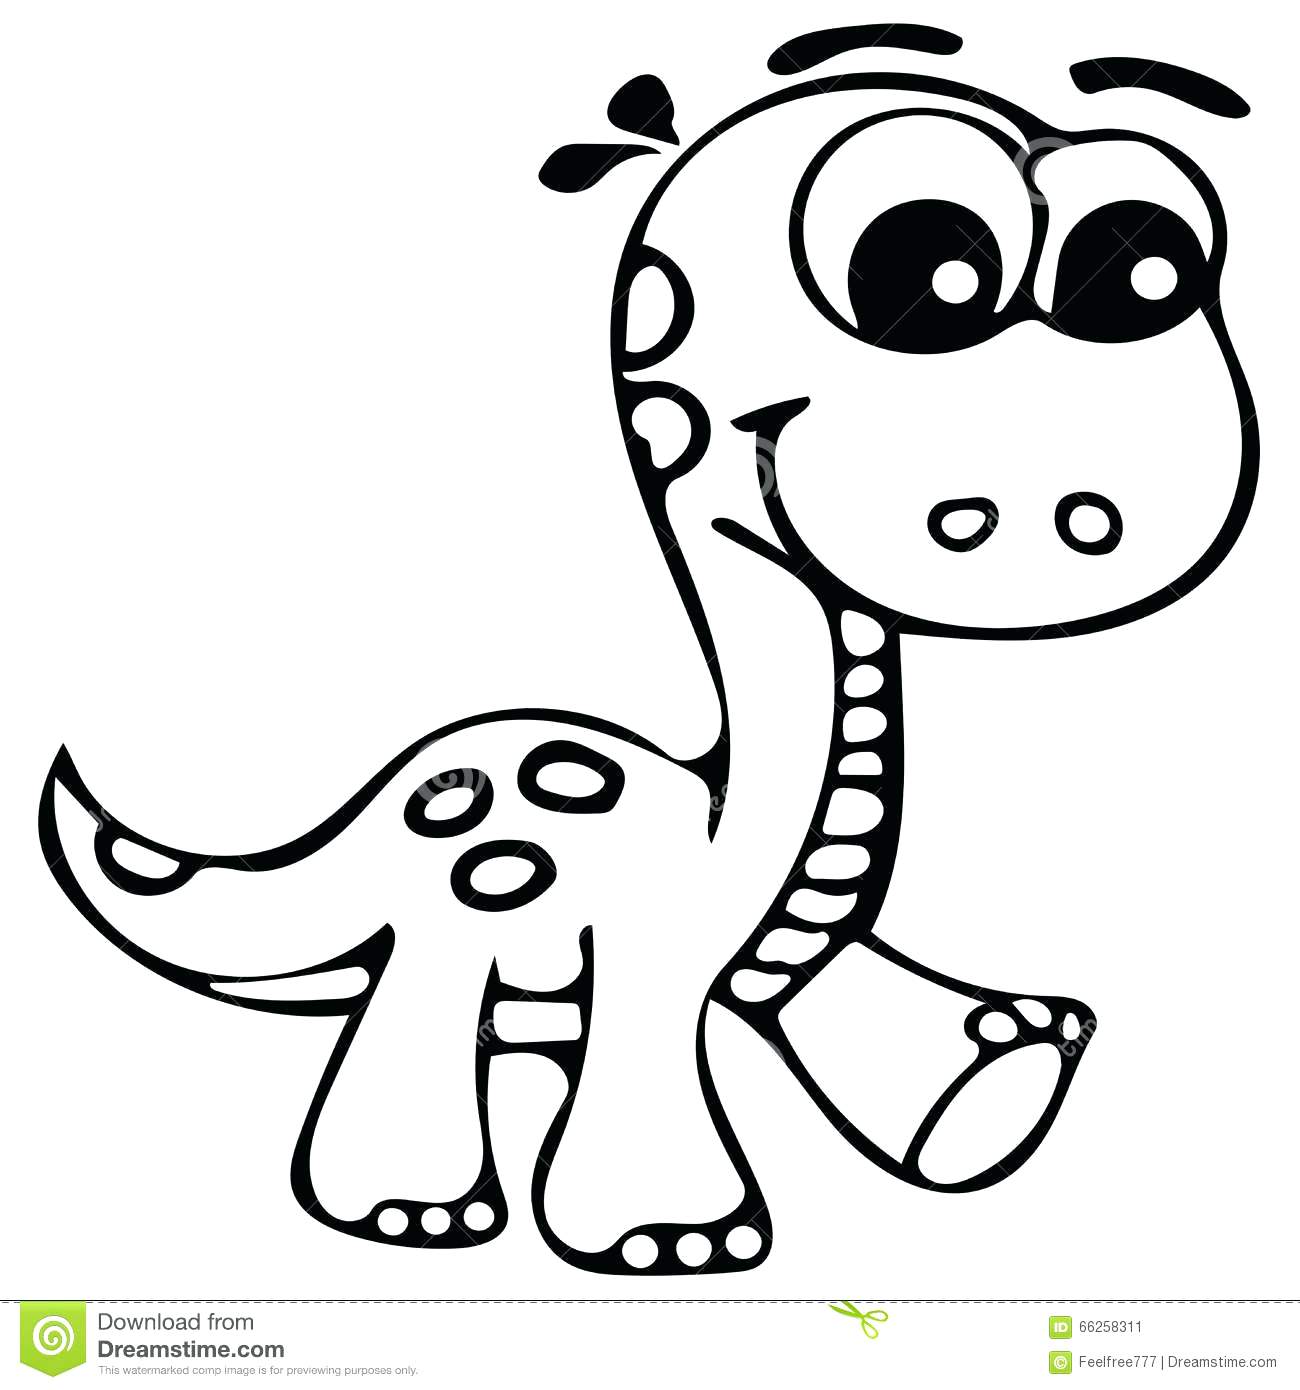 61 Simple Baby Dinosaur Coloring Pages with disney character